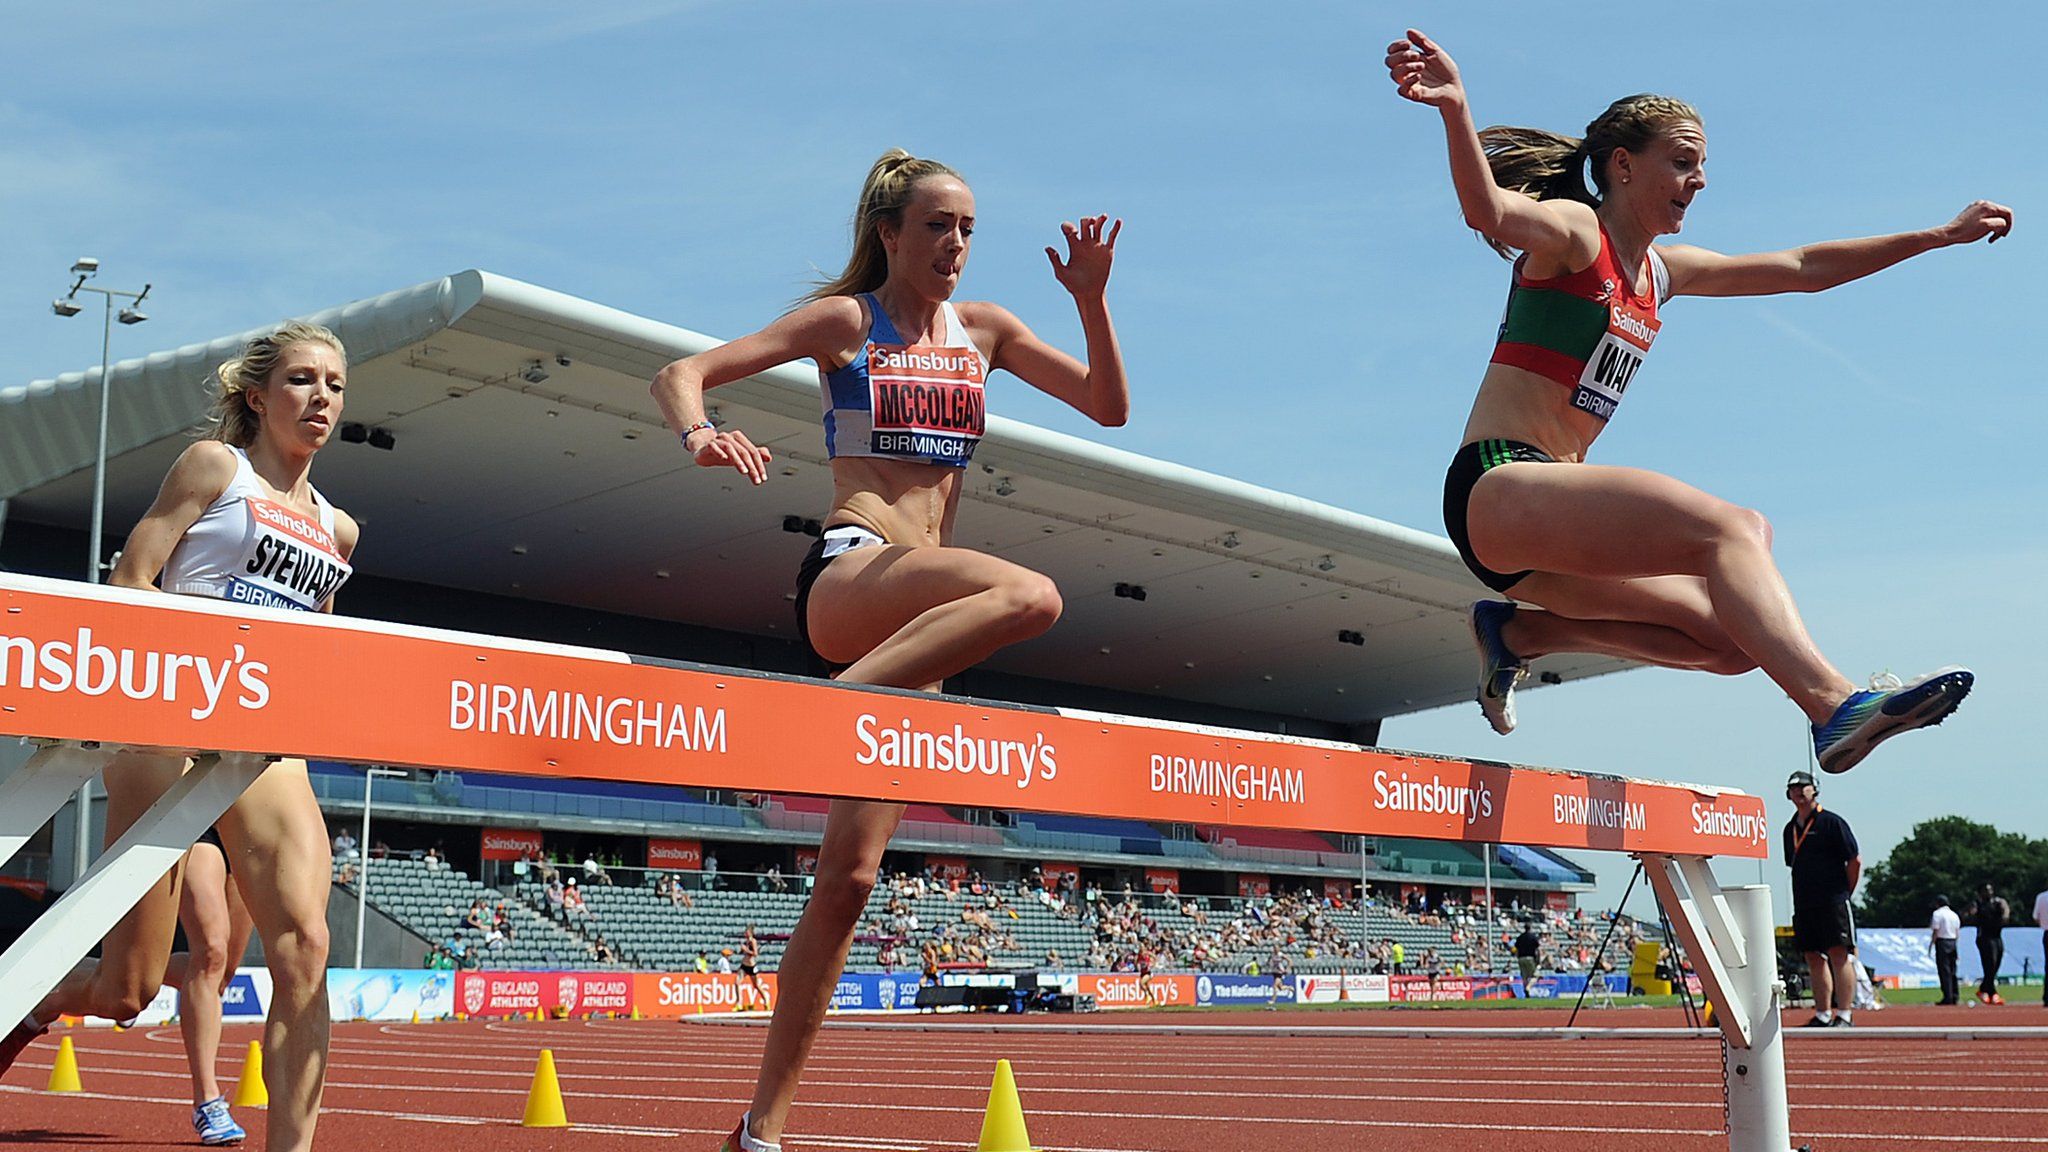 Eilish McColgan competing in a steeplechase event